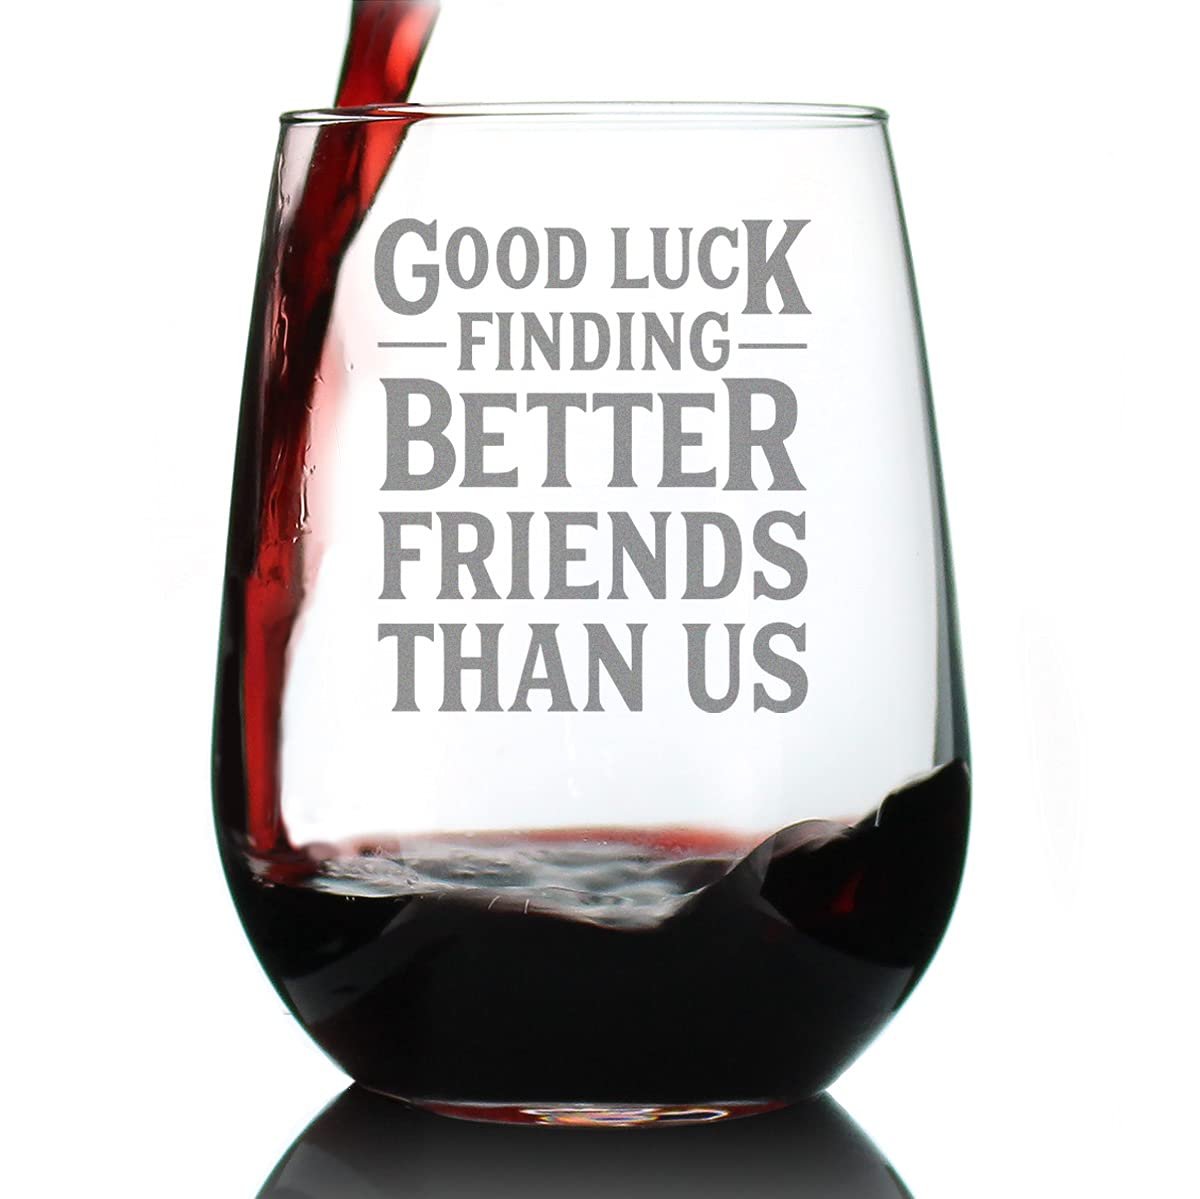 A stemless wine glass with the inscription "Good Luck Finding Better Friends Than Us"